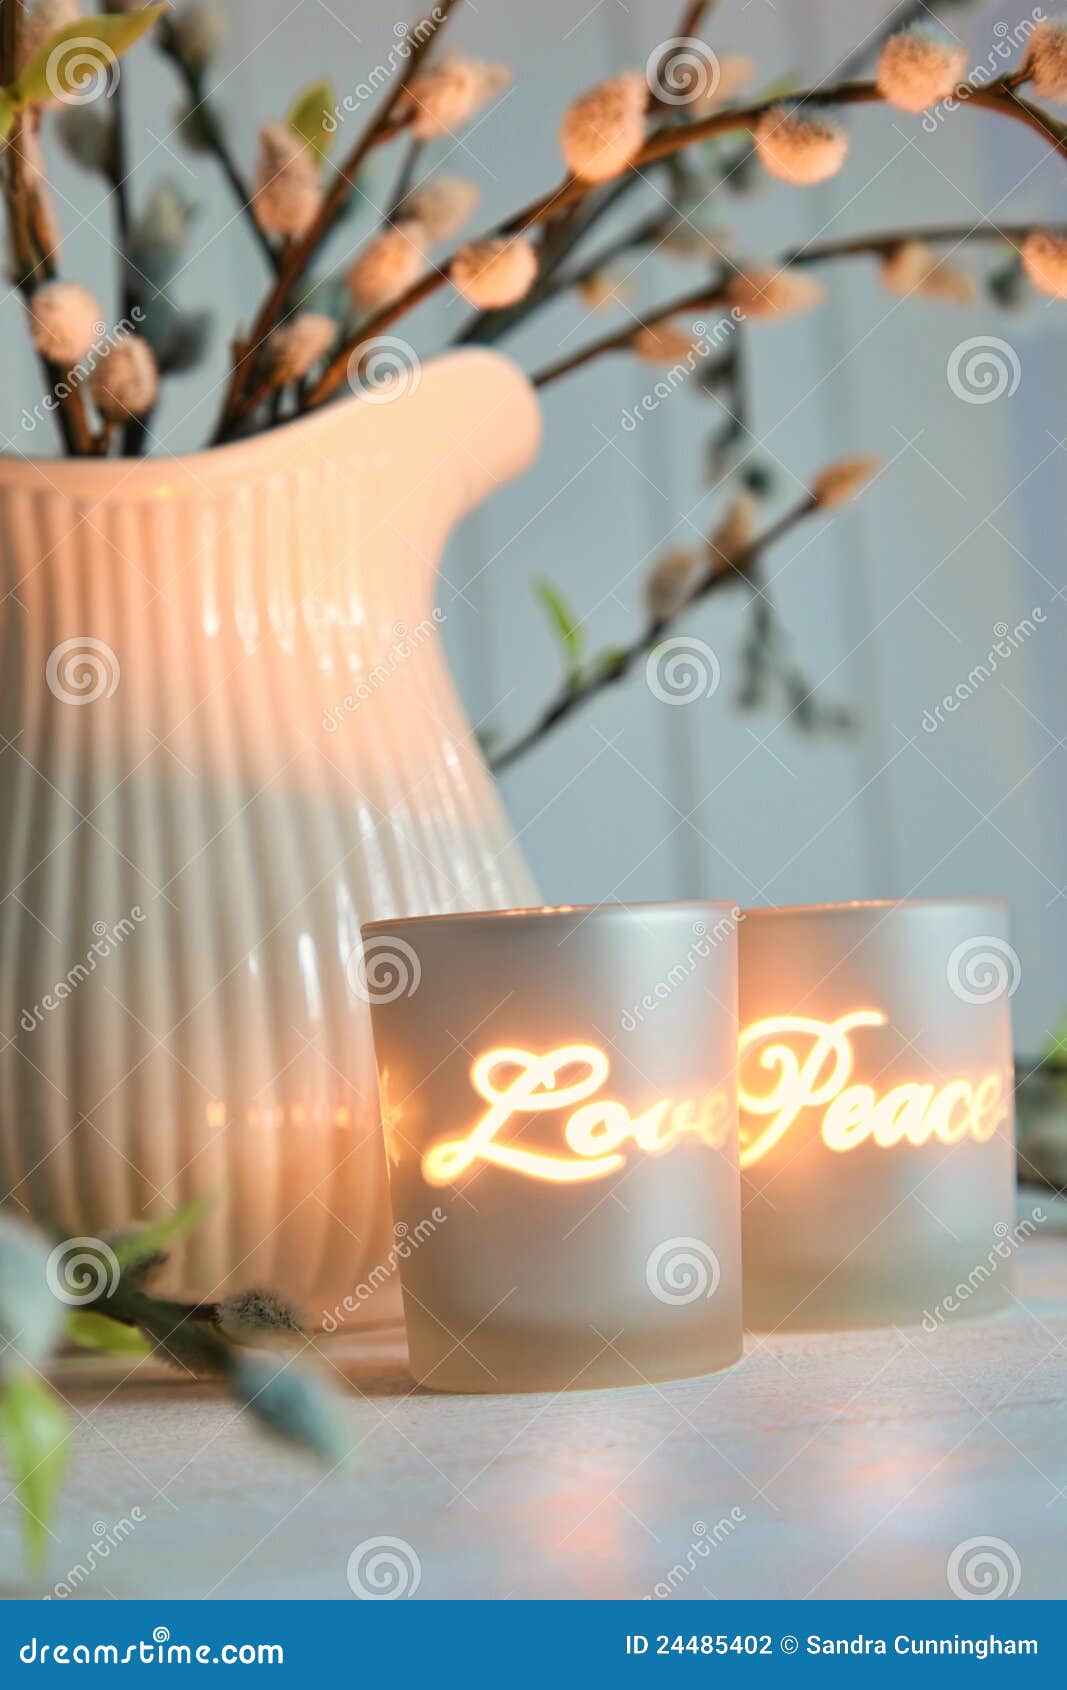 votive candles creating a relaxing atmosphere